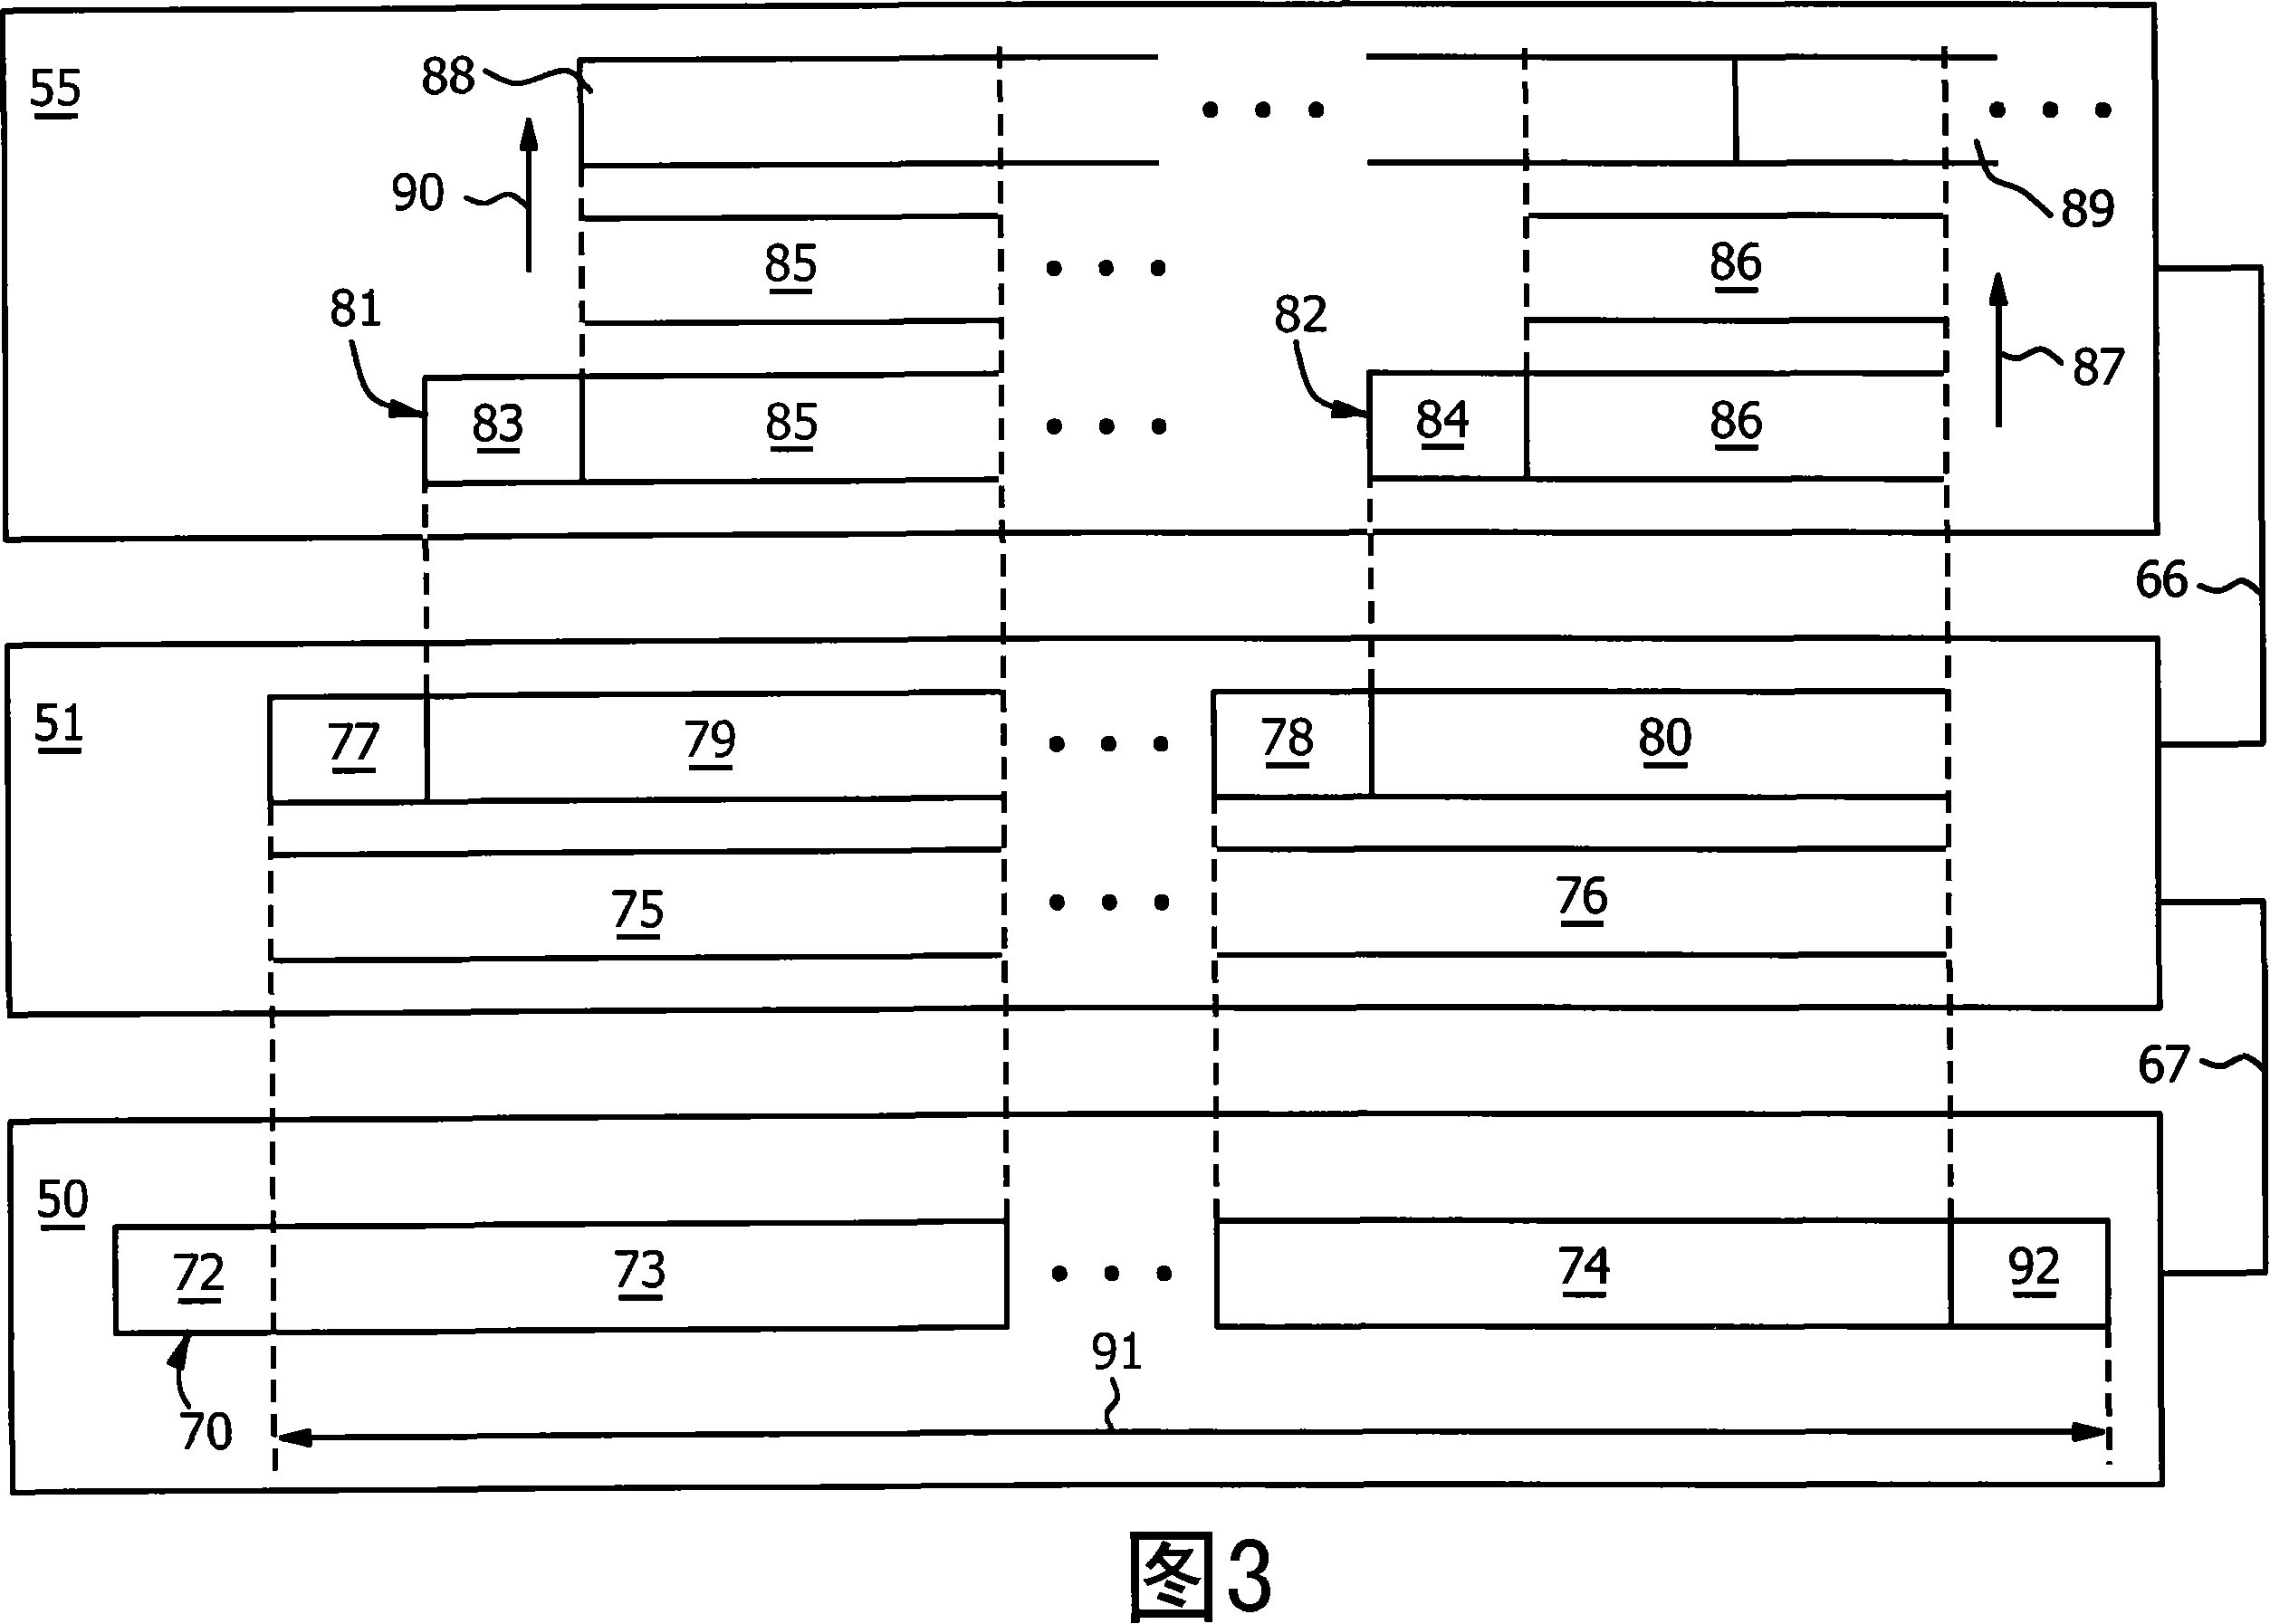 Receiver apparatus and method for receiving data units over a channel